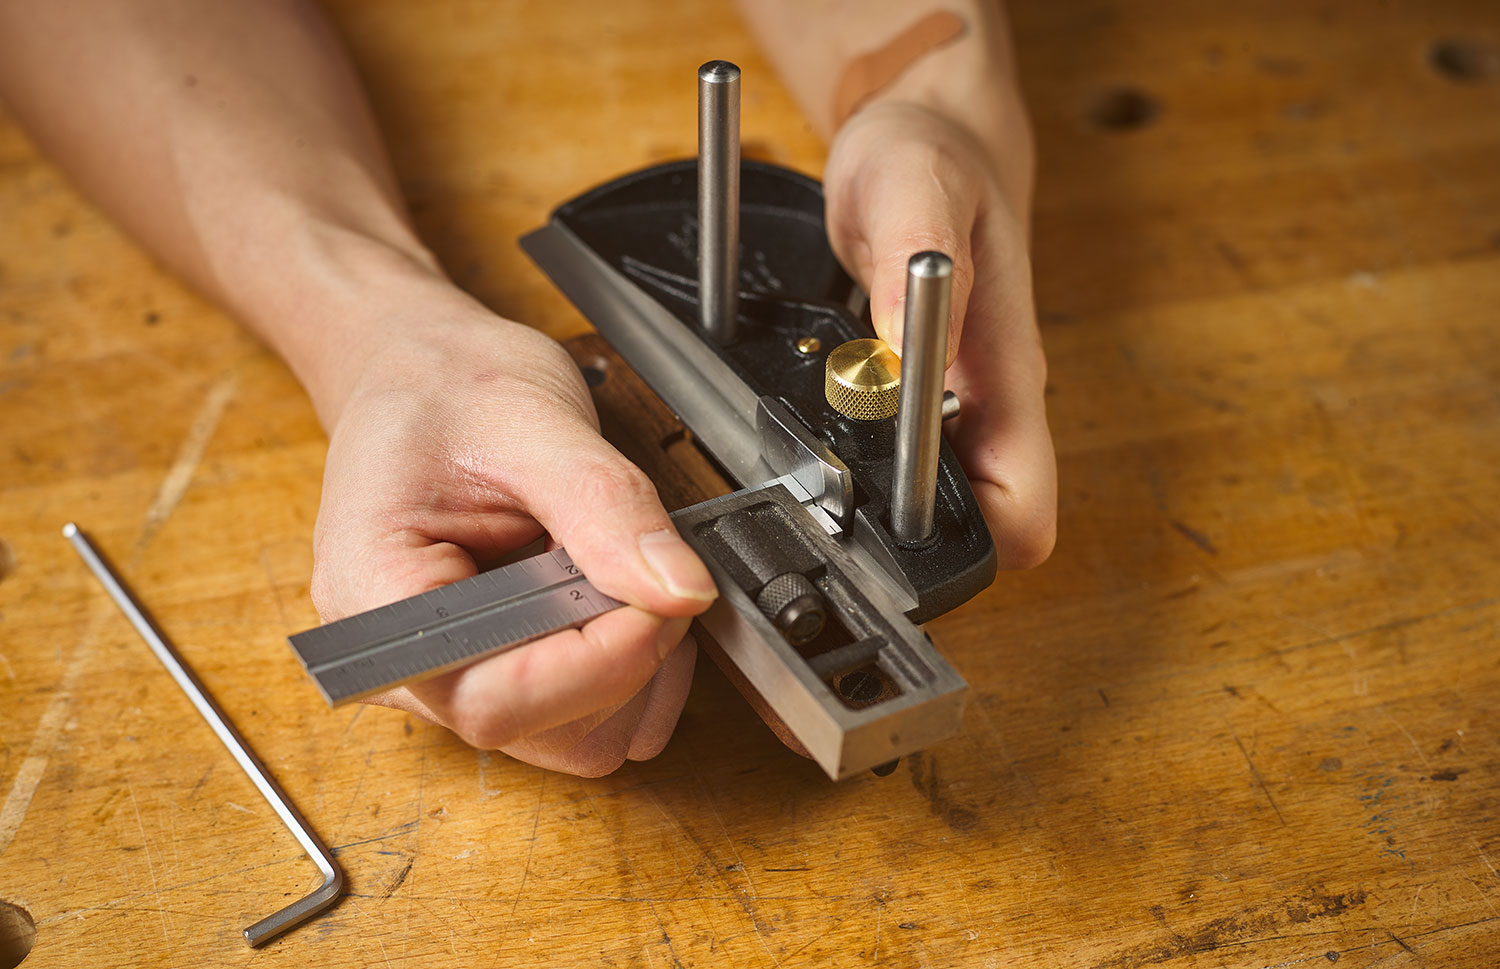 Registering a combination square against the skate of a box-maker’s plow plane to set the depth stop.